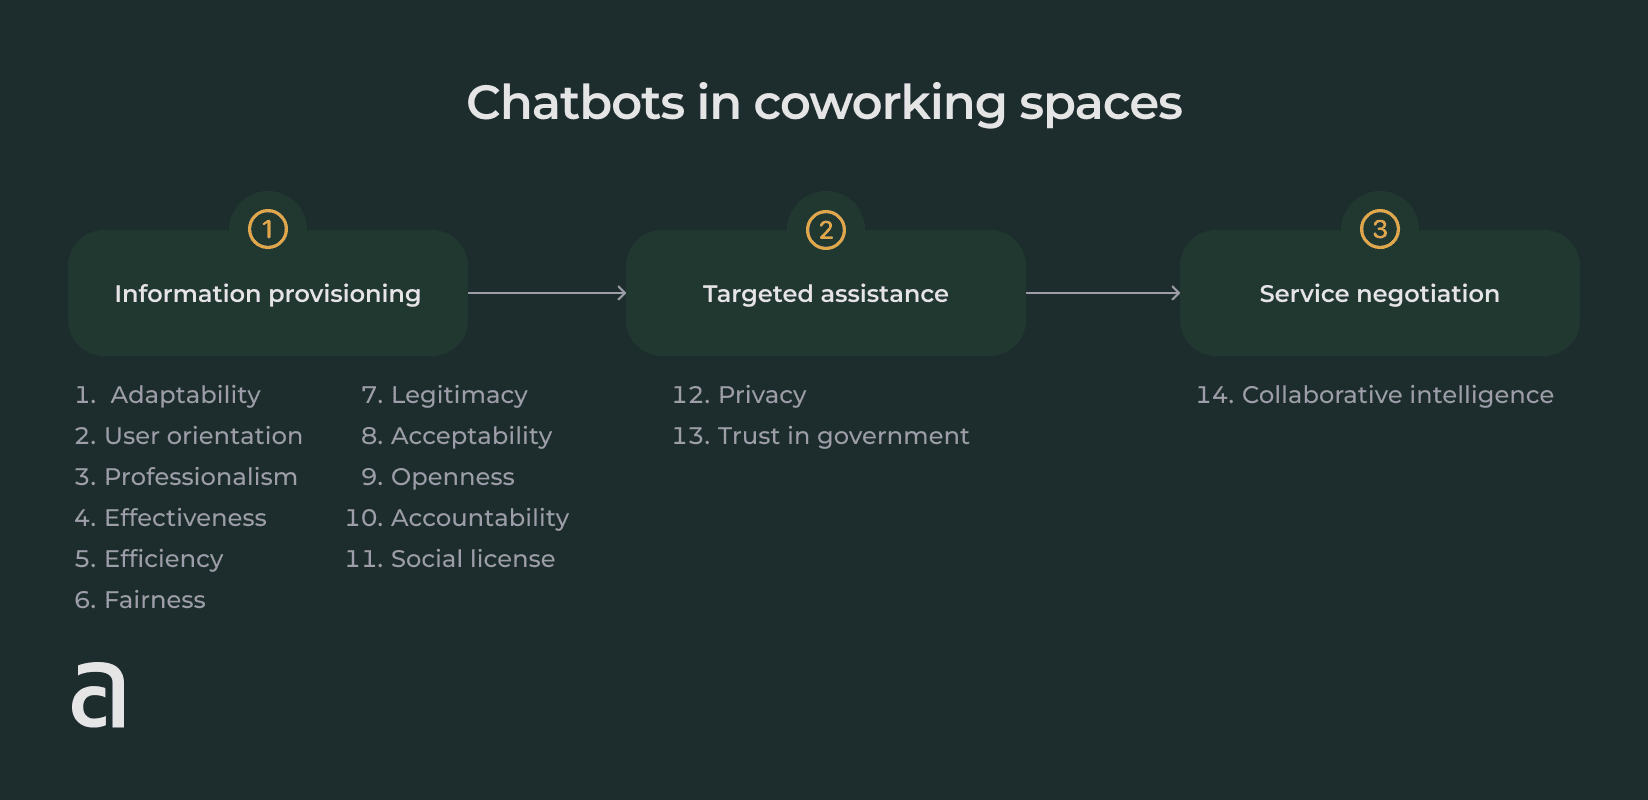 Using chatbots at coworking spaces